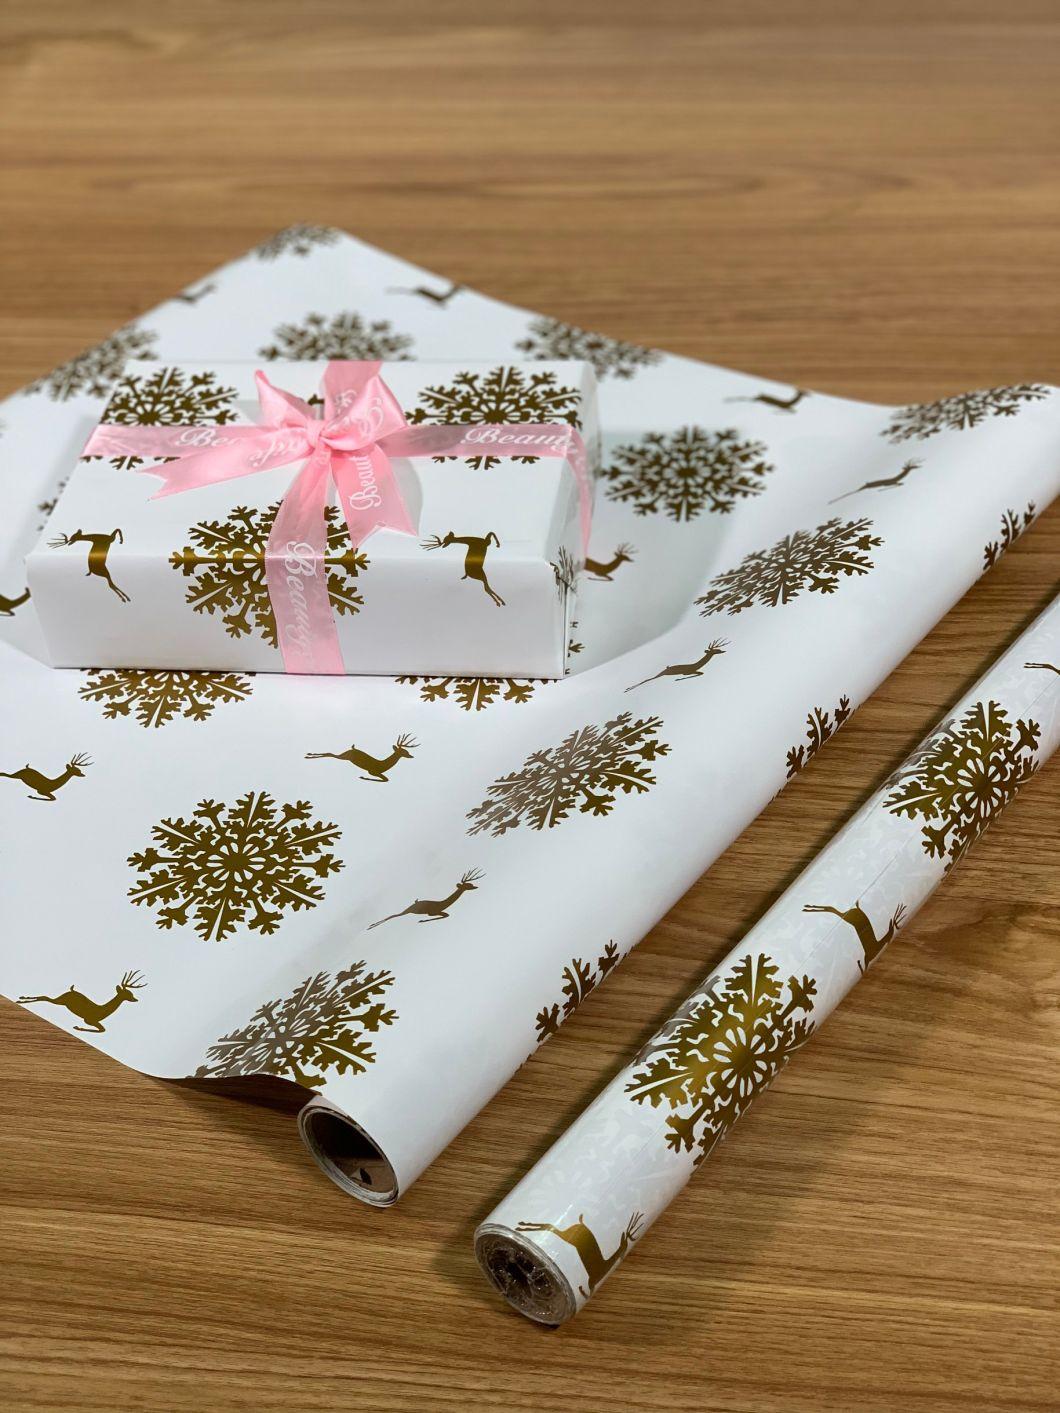 Good Offer Christmas Festival Wrapping Paper Gift Paper